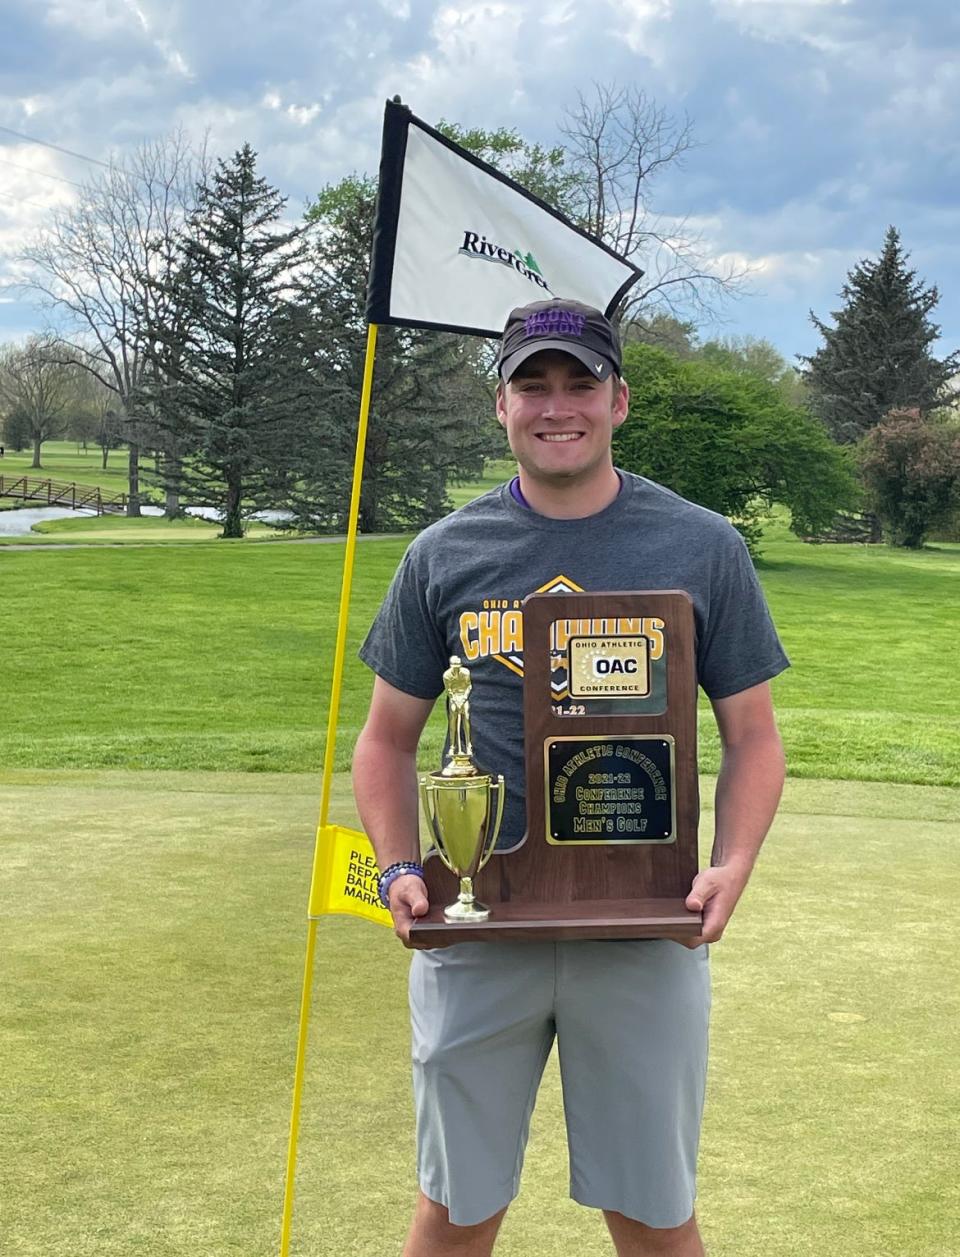 Mount Union junior Ian Smith, a Cambridge High graduate, holds the Ohio Athletic Conference Golf championship trophy after tying with John Carroll’s John Order for co-medalist honors at River Greens Golf Course earlier this month.